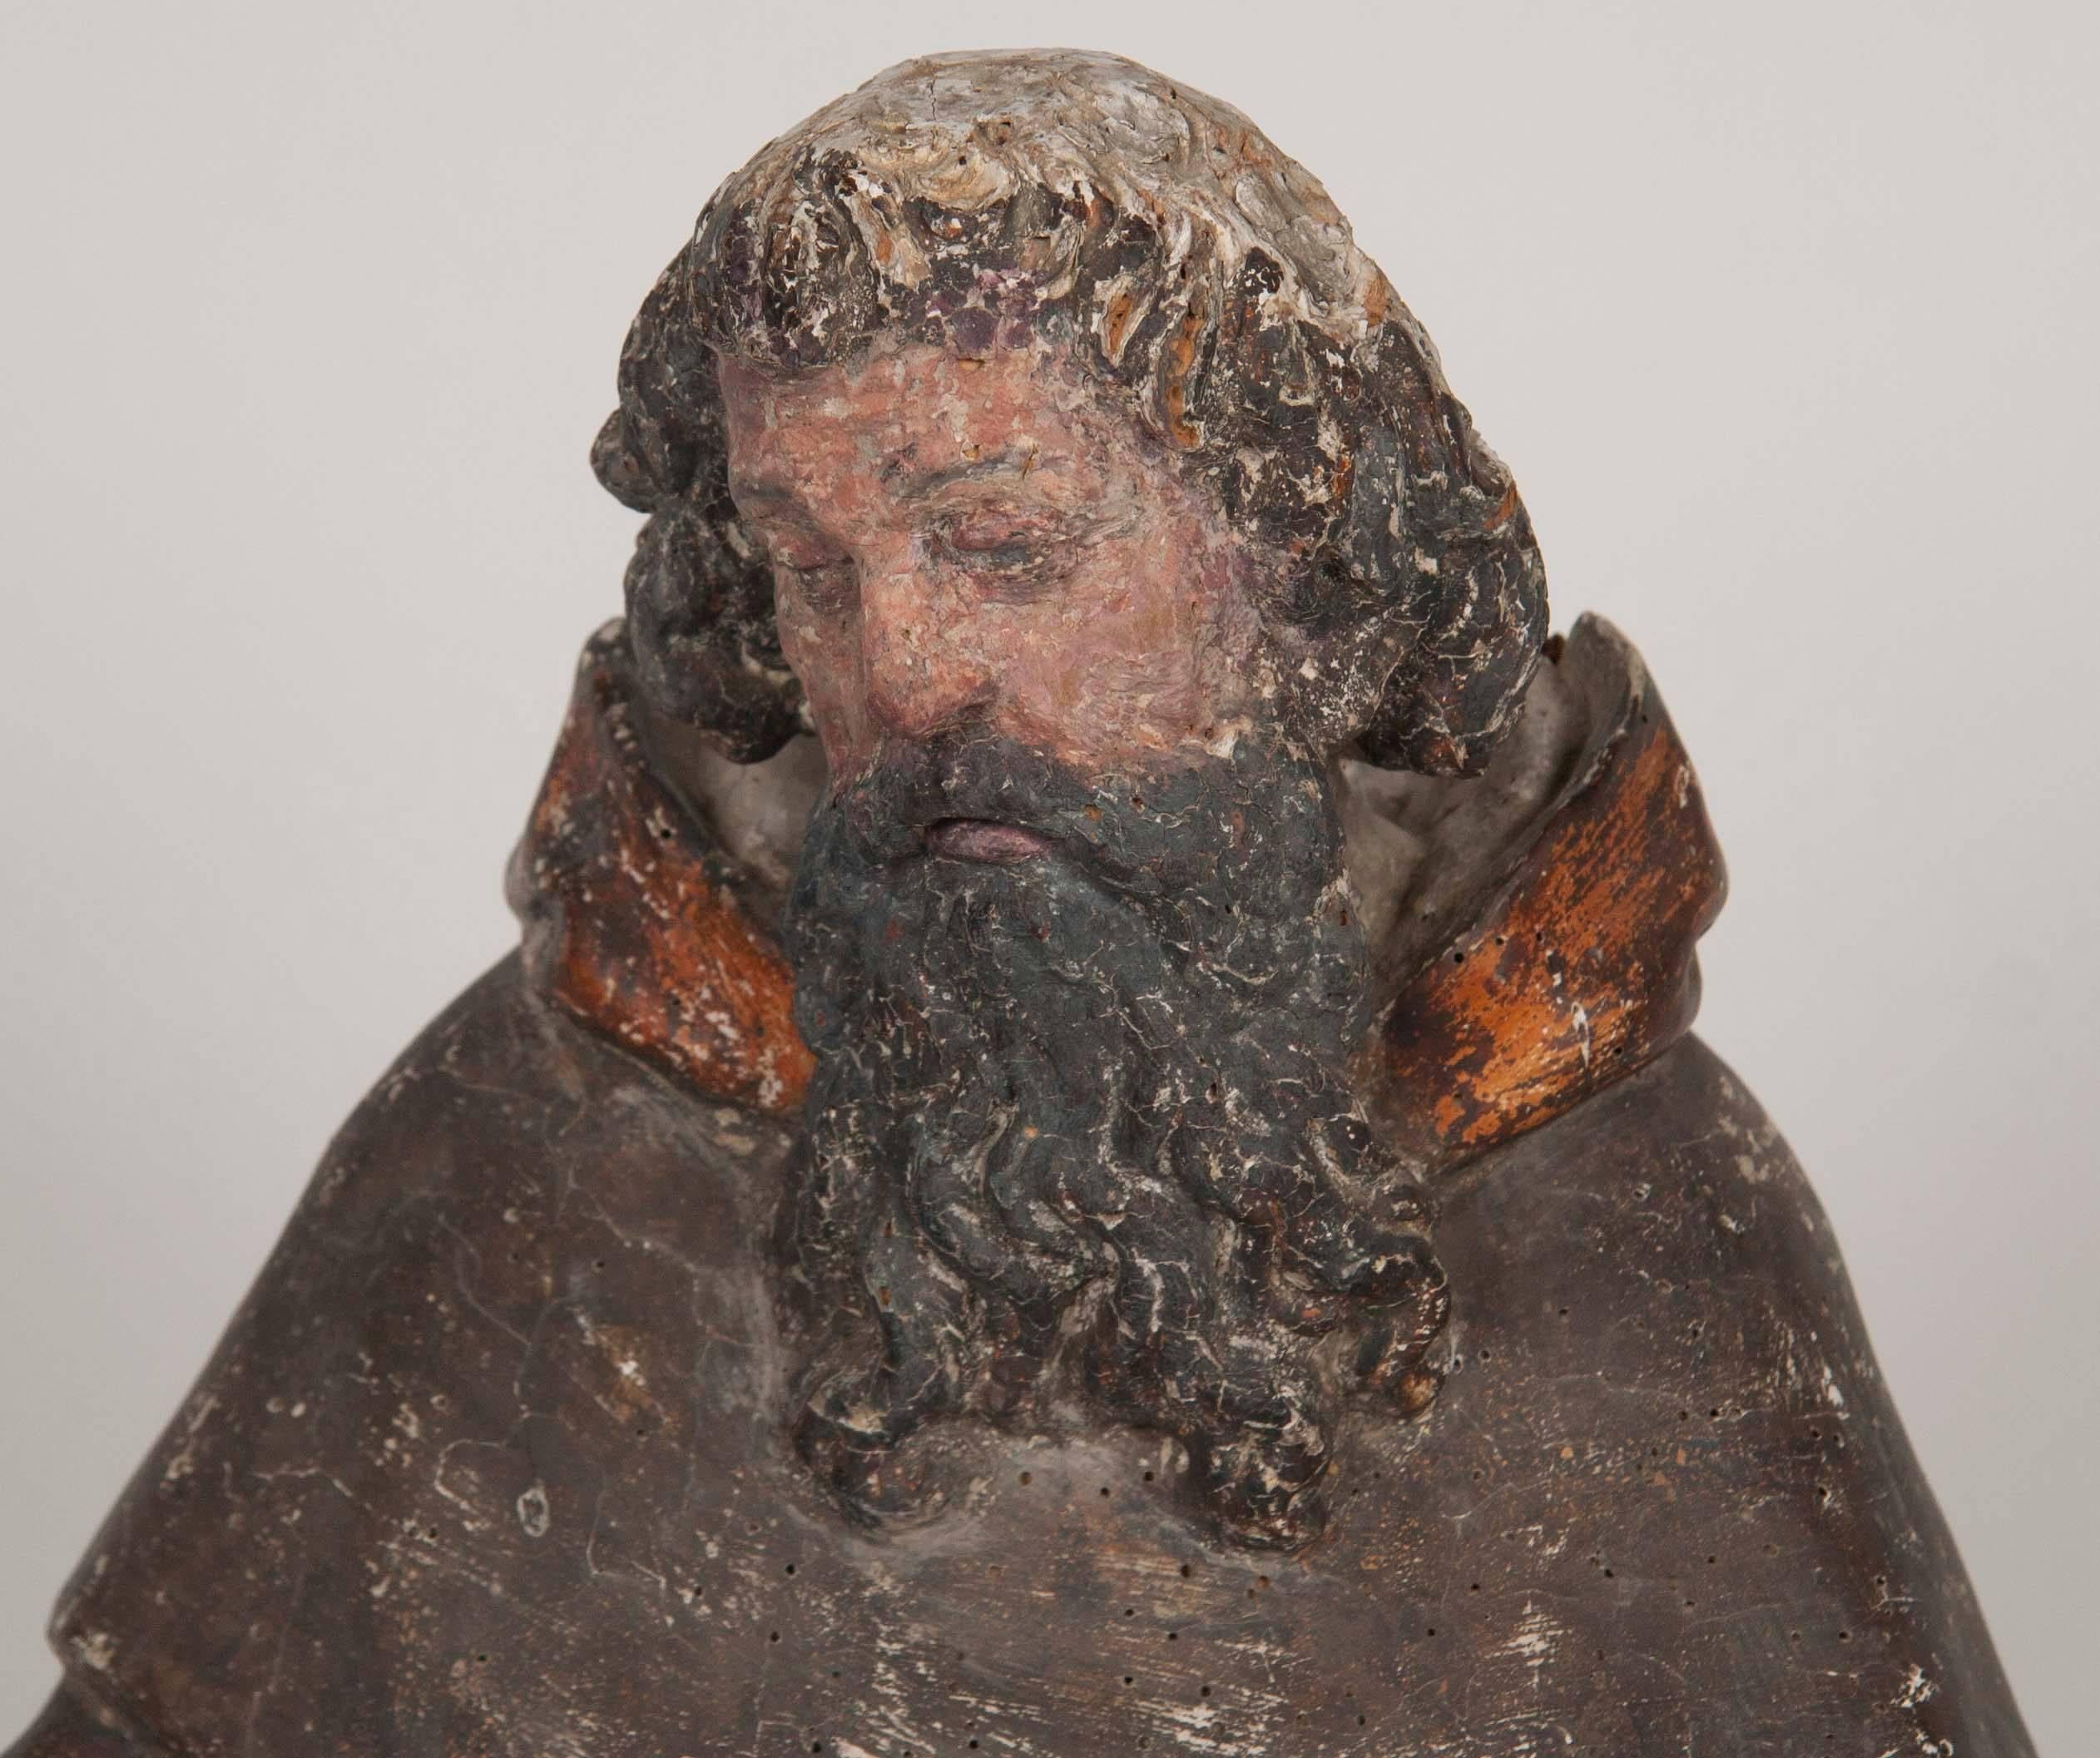 16th century Italian carved and polychromed figure of a male saint or prophet with a wonderful presence. Shown holding an open book in his right hand with flames at his feet, mid-16th century. Though the surface is worn down to the red bol from age,